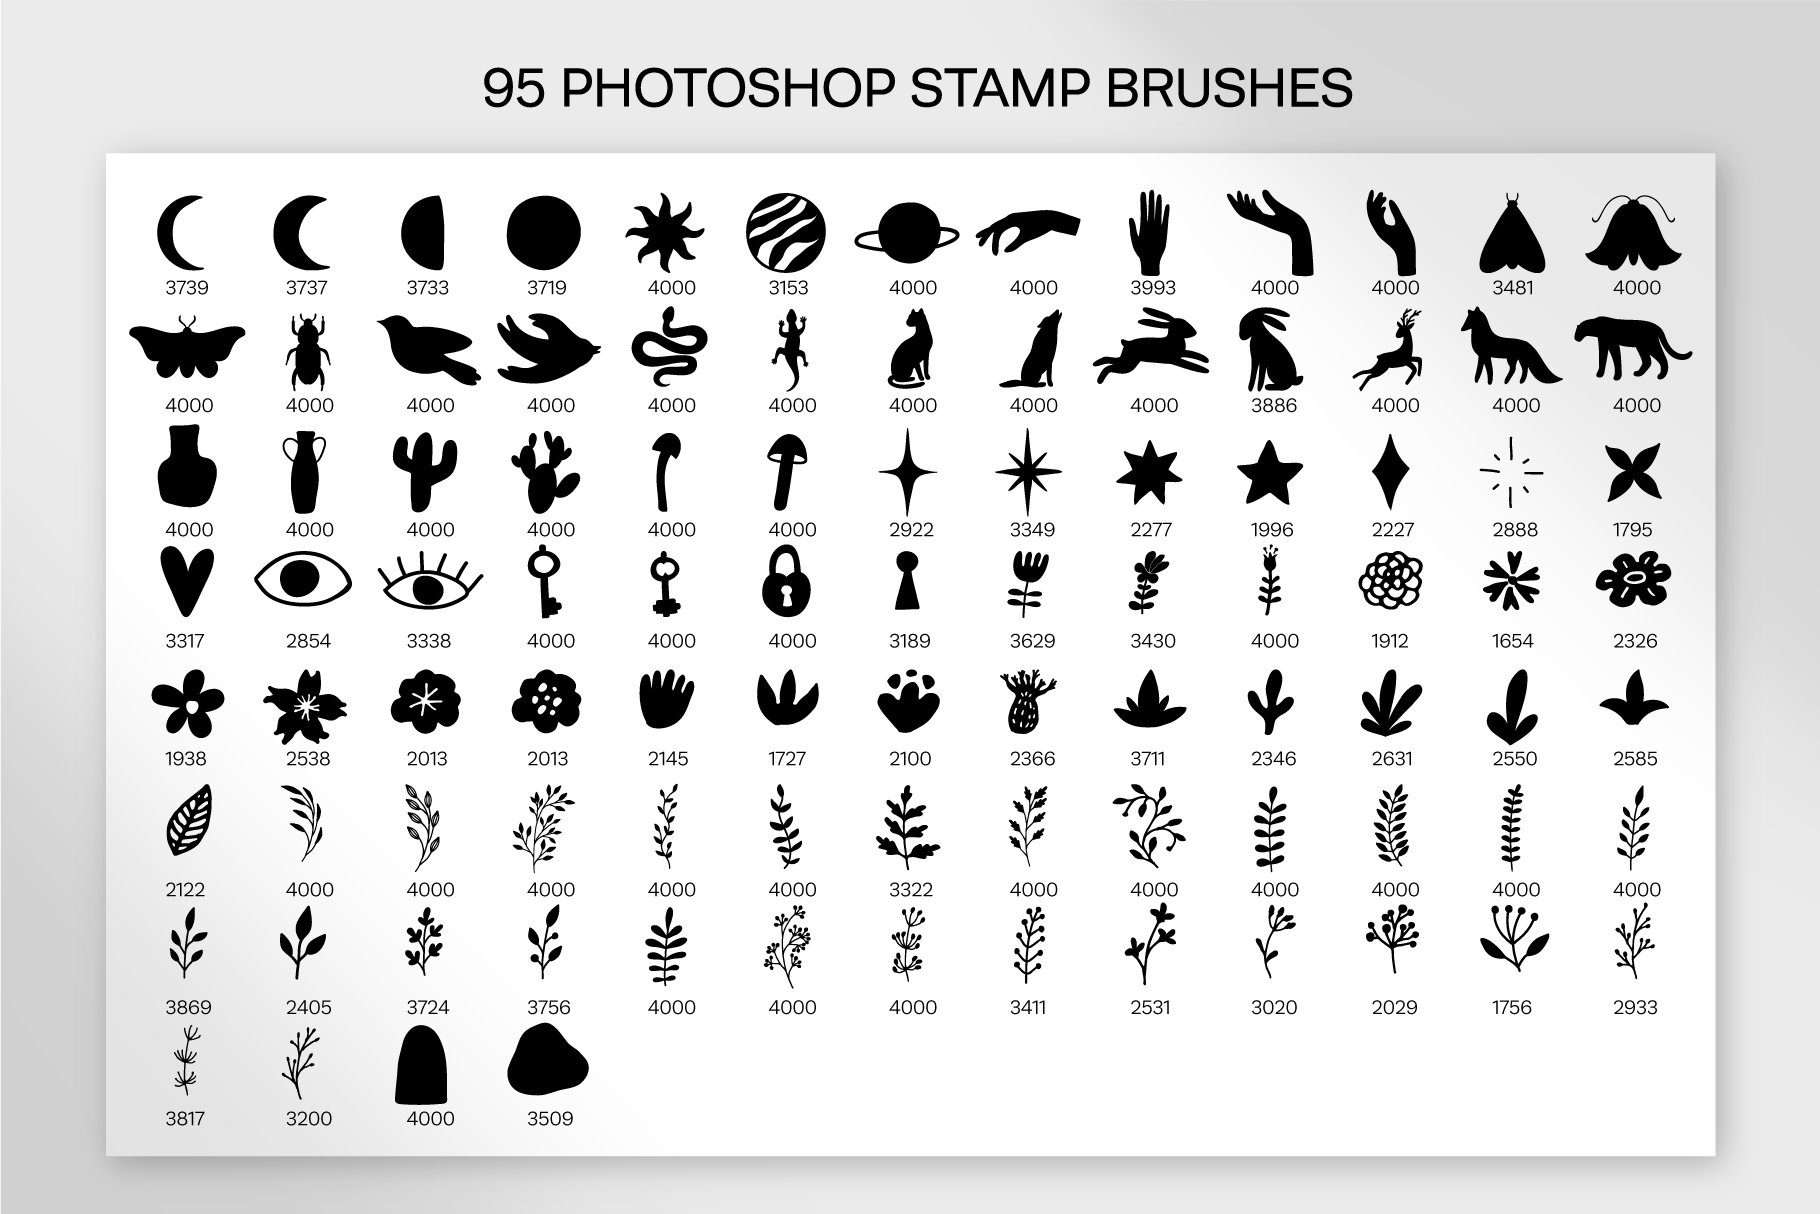 linocut style stamp brushes preview5 490